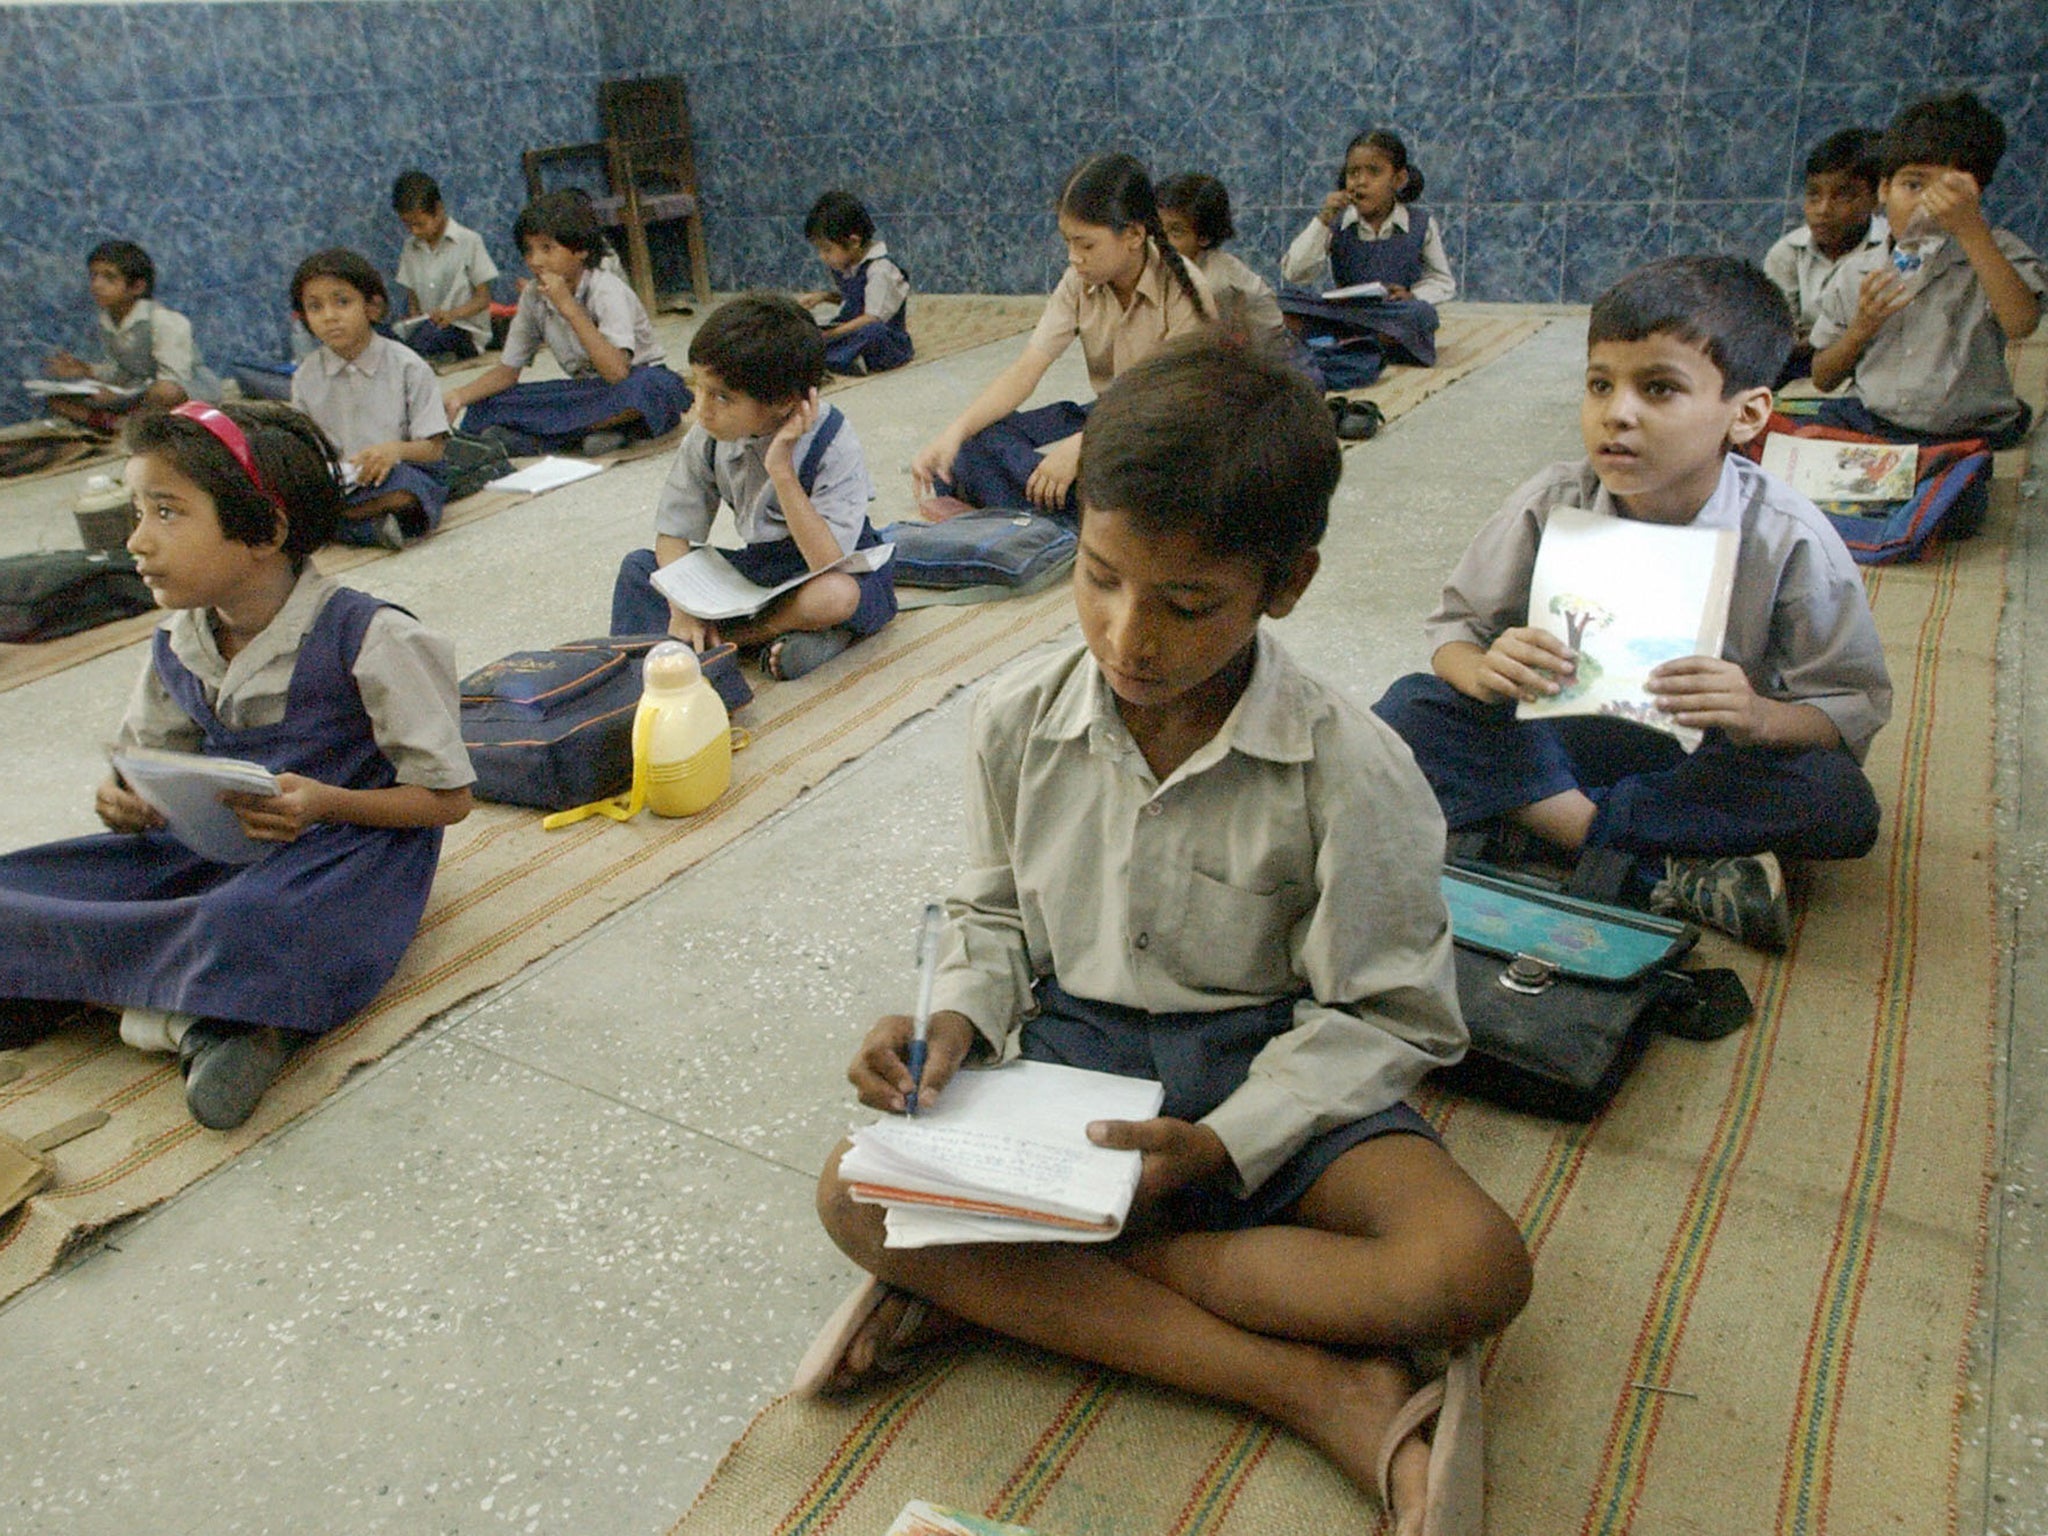 Between 2005 and 2014, India stepped up investment in education from about $14 billion to $62 billion